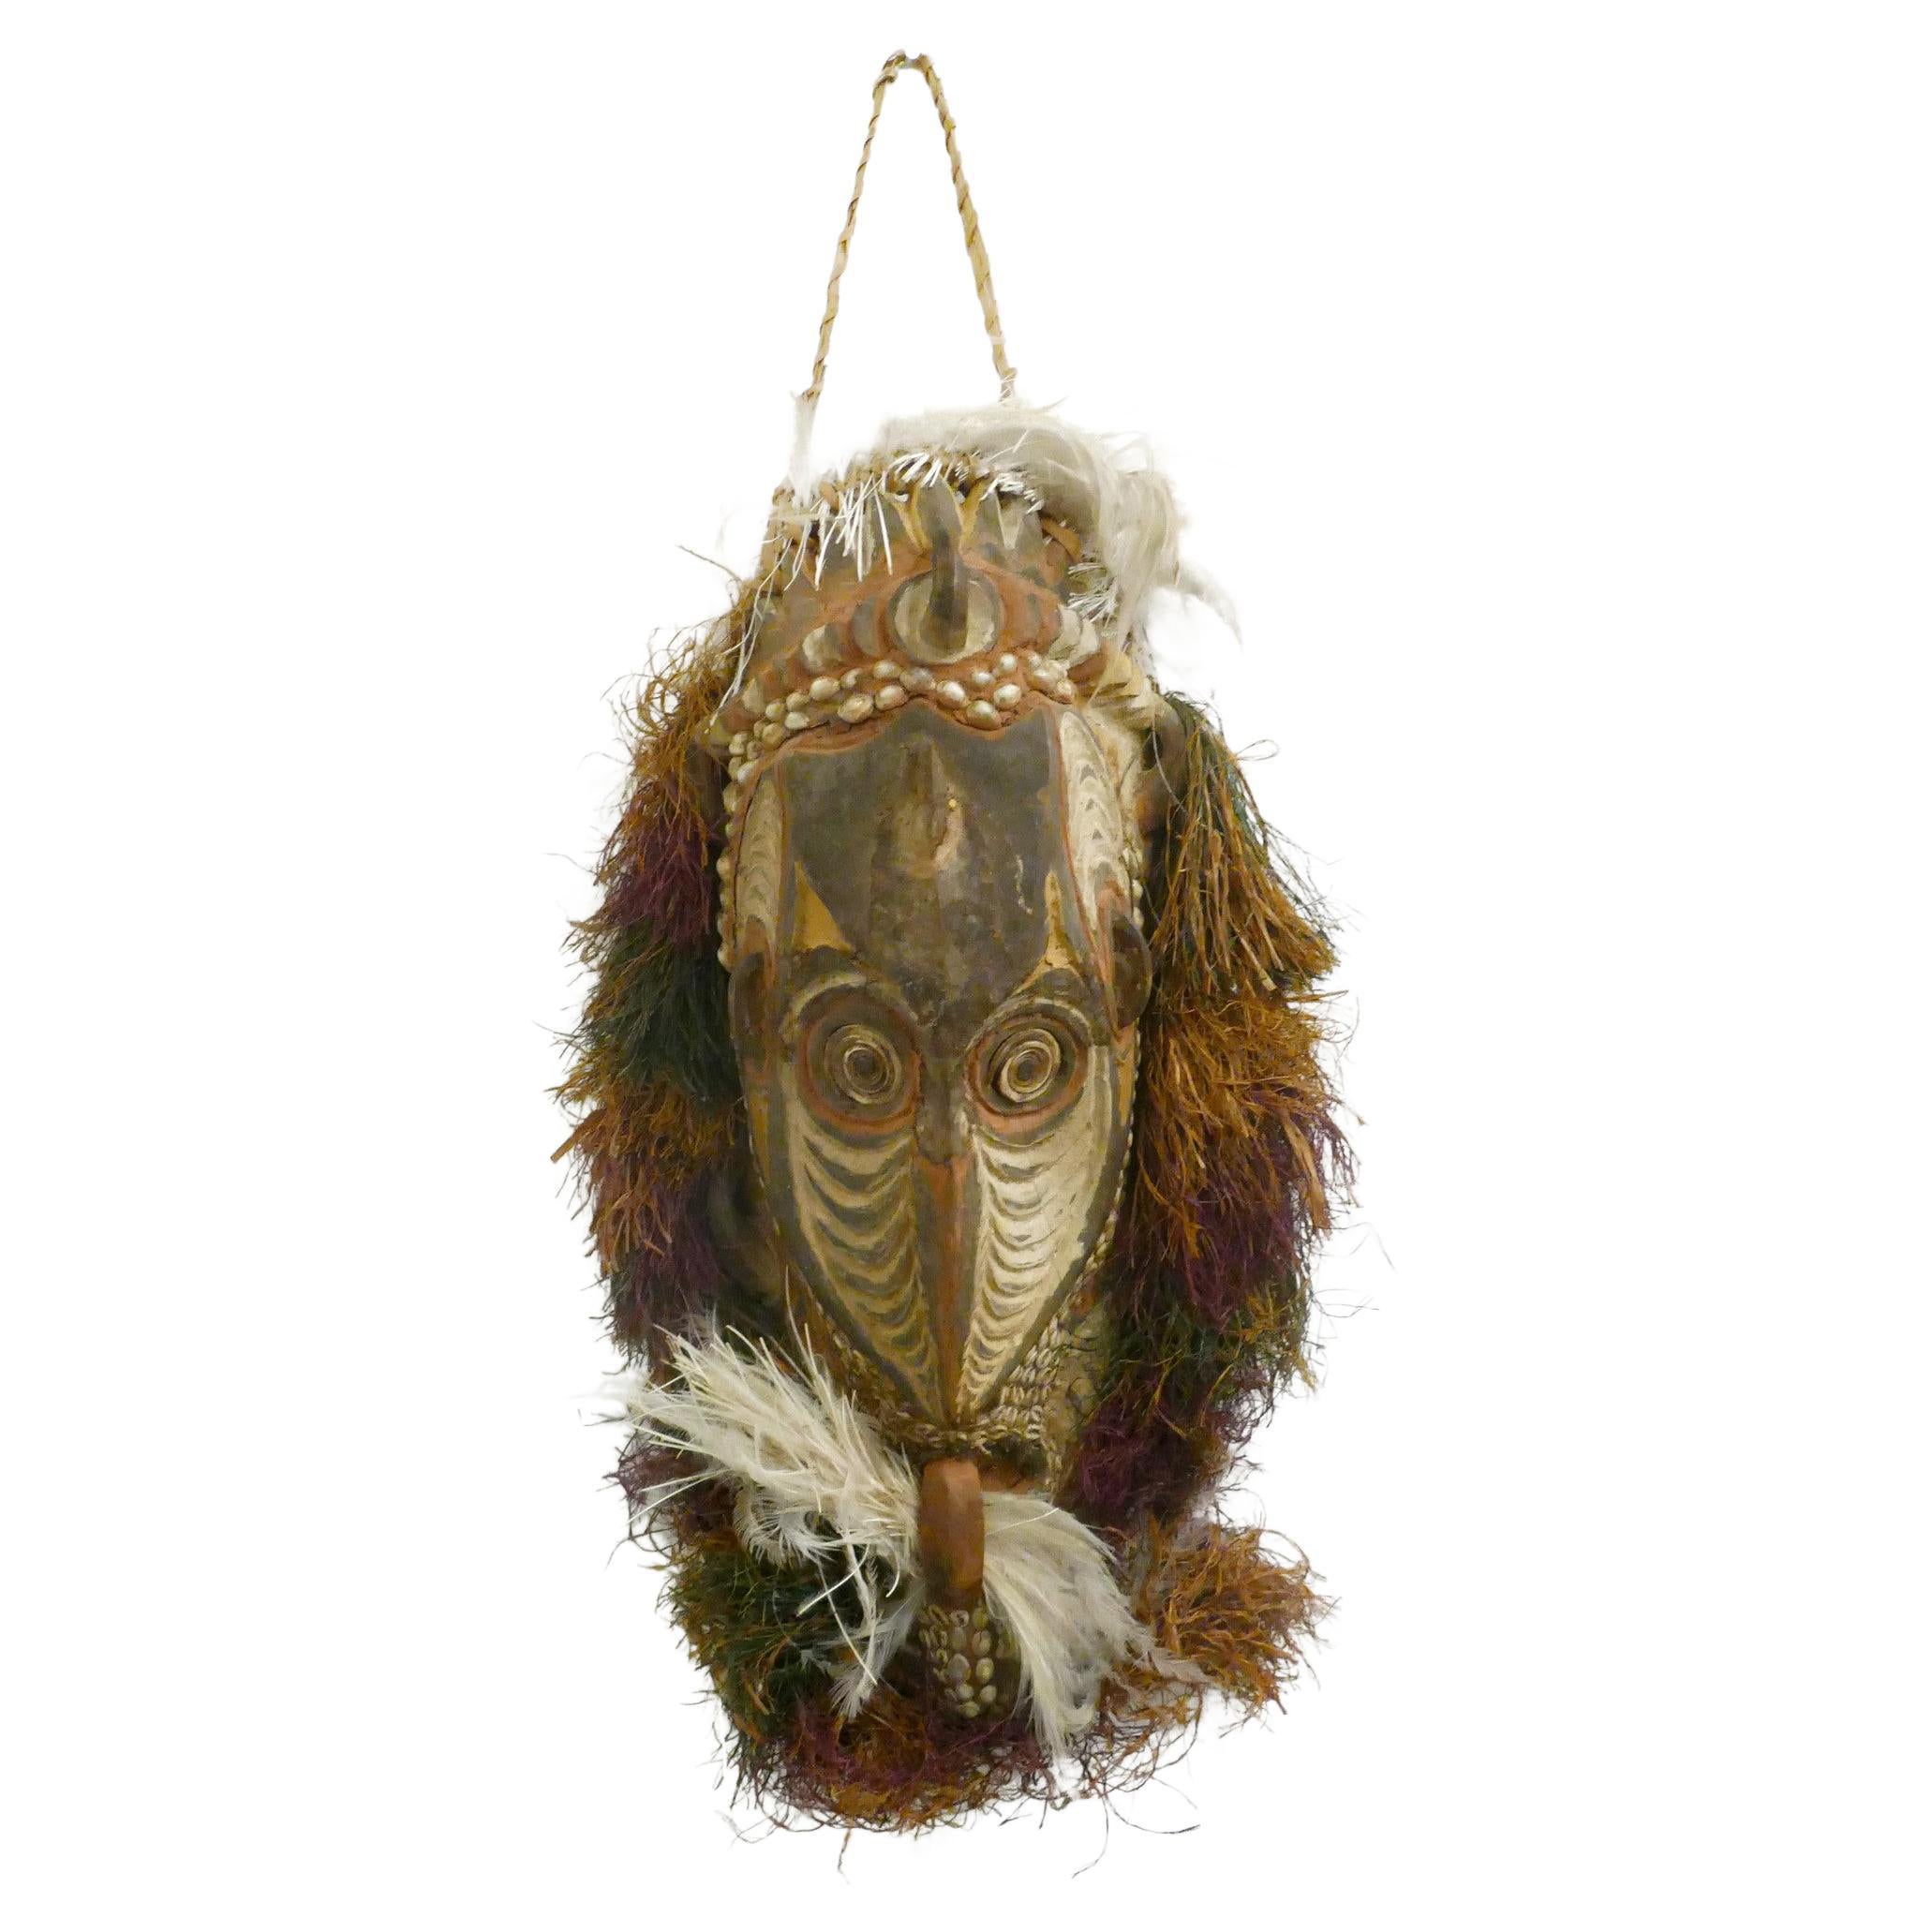 Papua New Guinean Wall Decorations